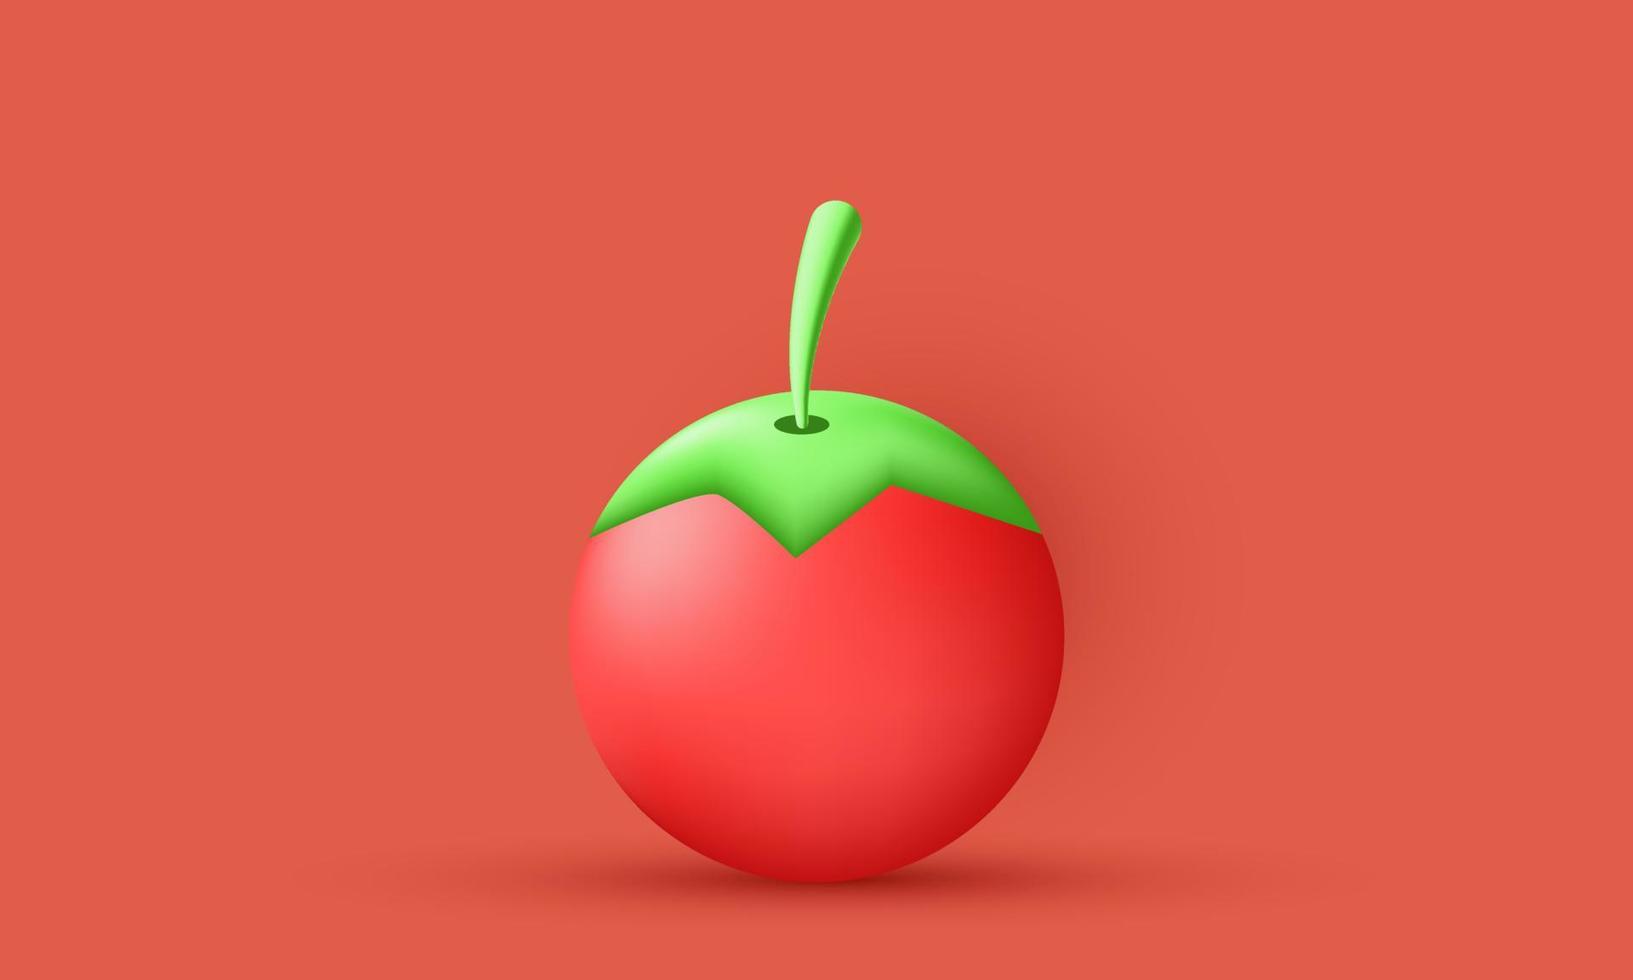 unique tomato 3d fruits vegetables illustration design icon isolated on vector